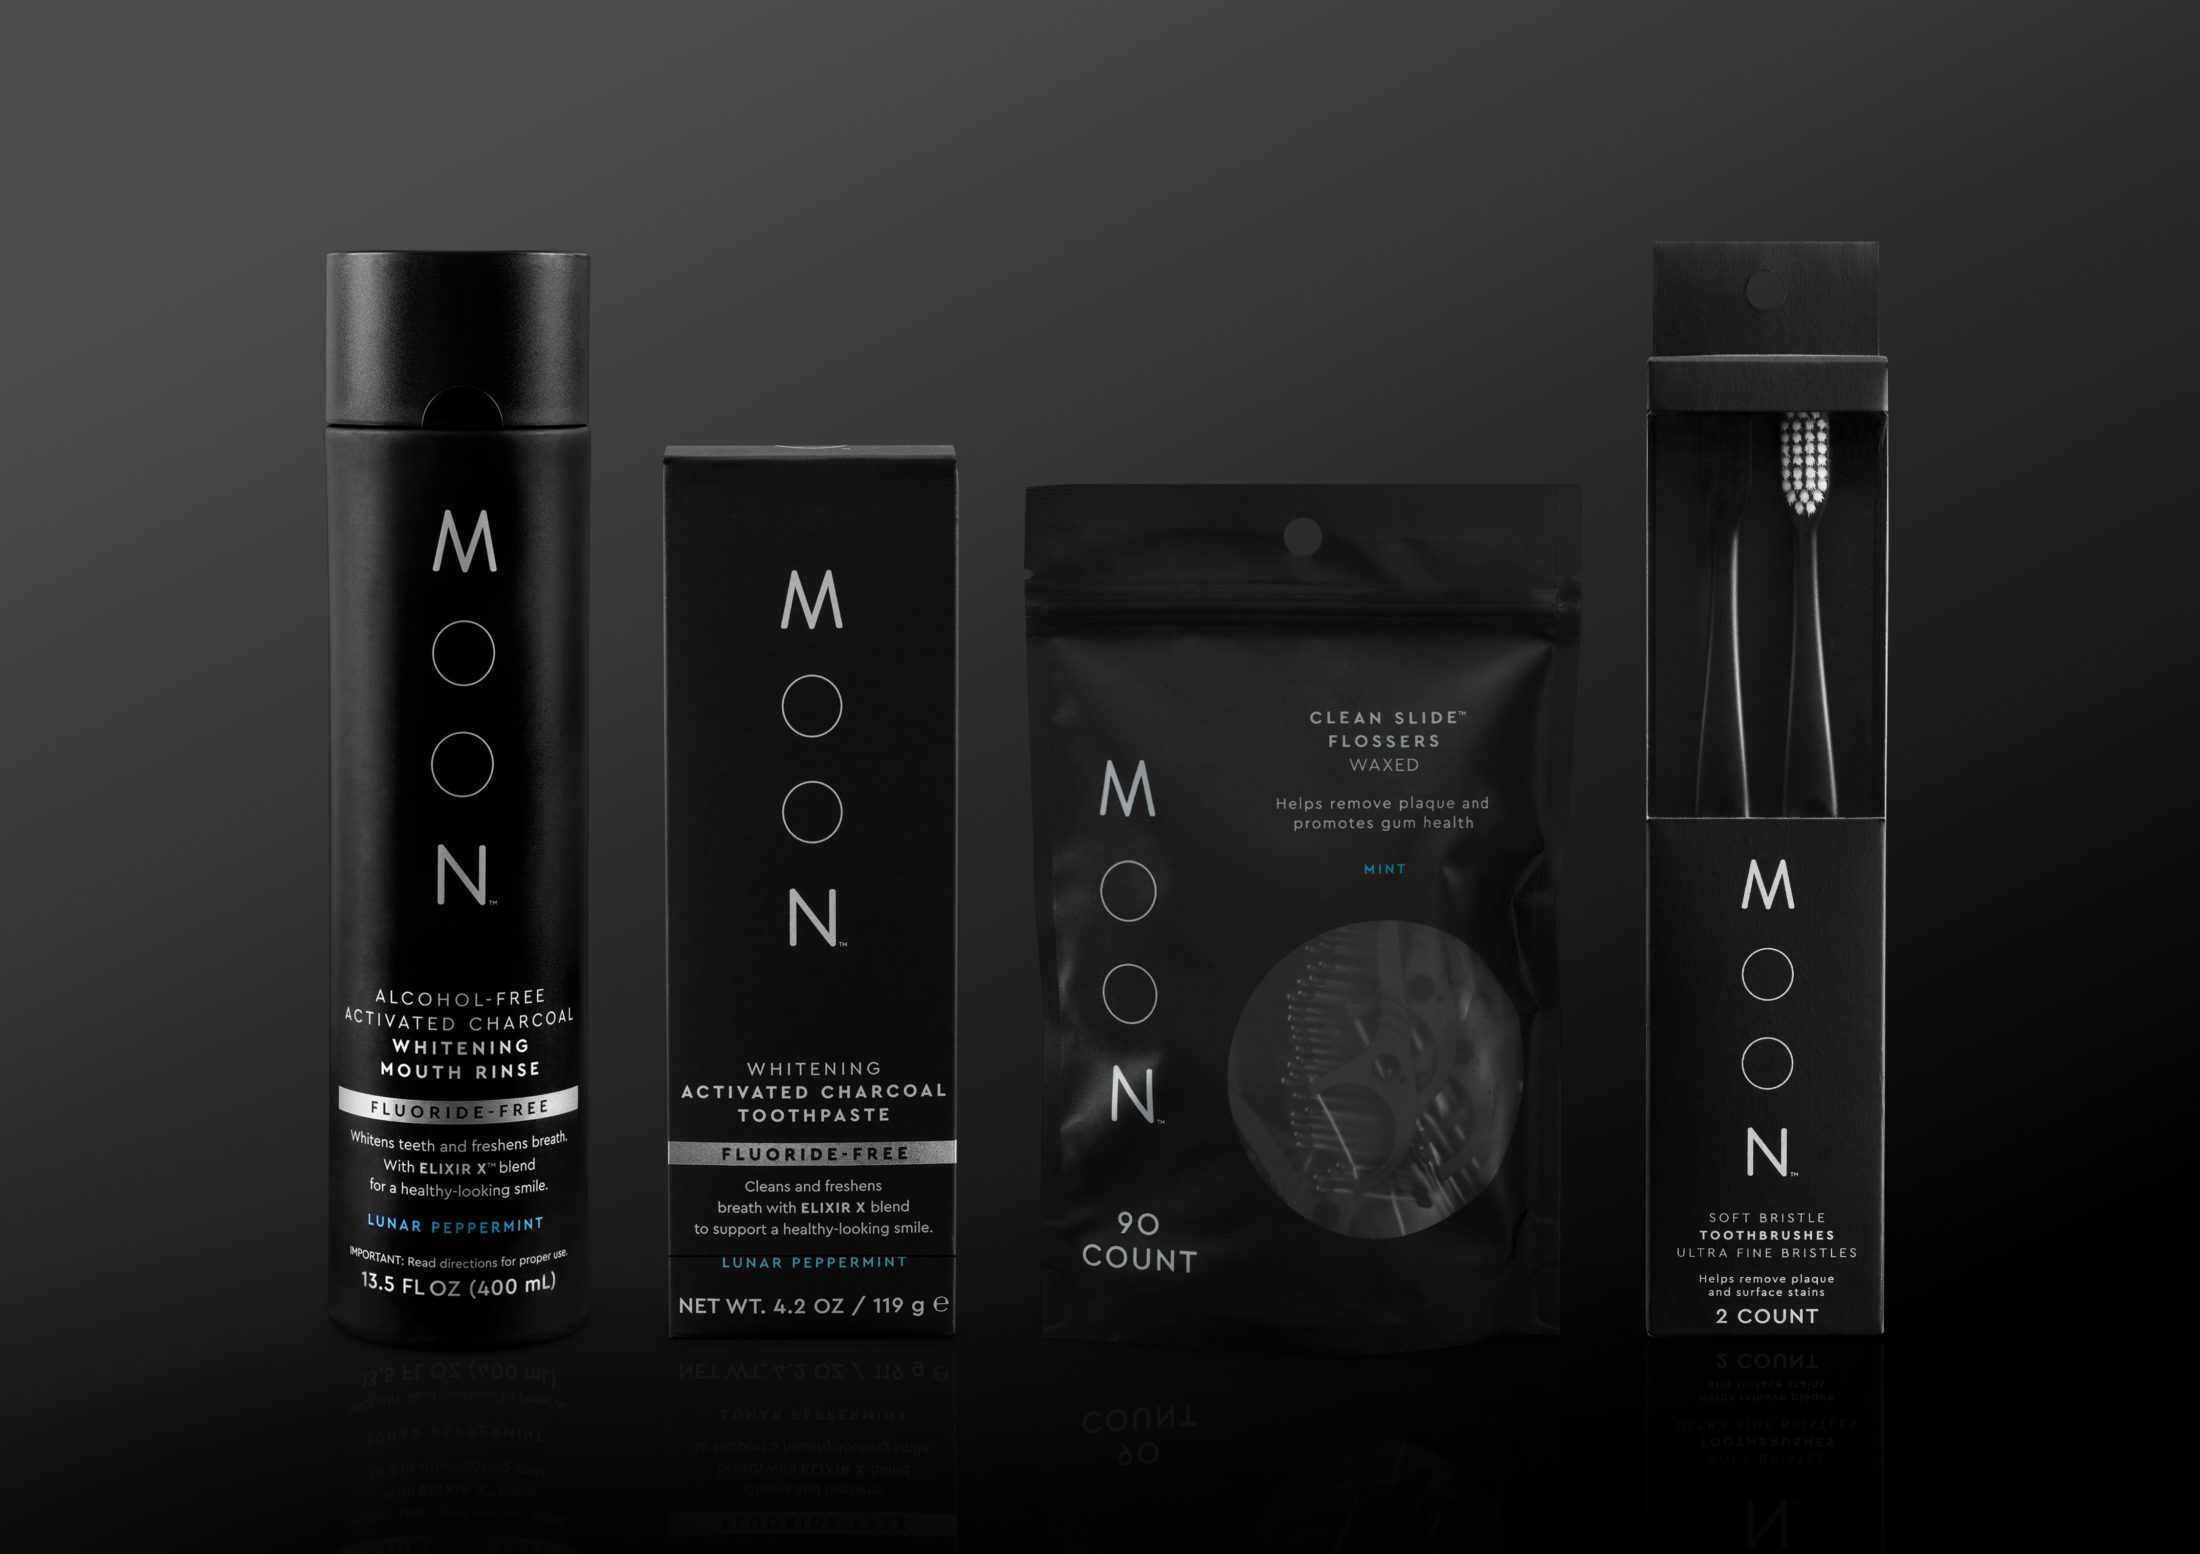 Moon Oral Care lineup of 4 products - Alcohol-Free Activated Charcoal Whitening Mouth Rinse, Whitening Activated Charcoal Toothpaste, Clean Slide™ Flossers, Soft Bristle Toothbrushes 2 pack. Packaging is black with typographic logo of "MOON" written vertically in silver. Products are photographed on a black surface.